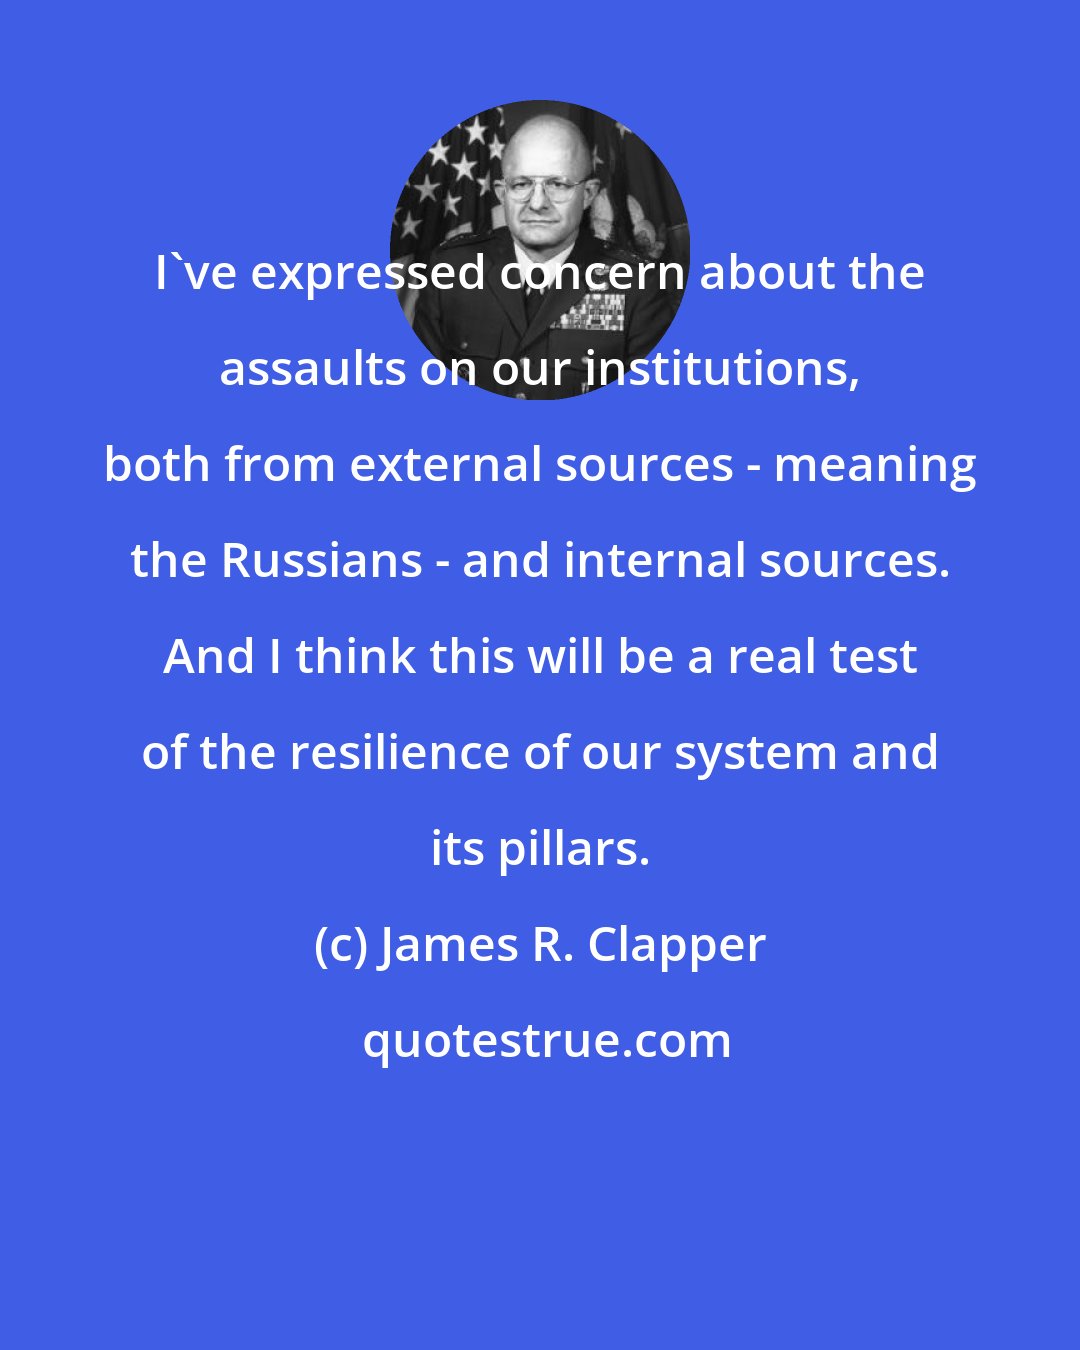 James R. Clapper: I've expressed concern about the assaults on our institutions, both from external sources - meaning the Russians - and internal sources. And I think this will be a real test of the resilience of our system and its pillars.